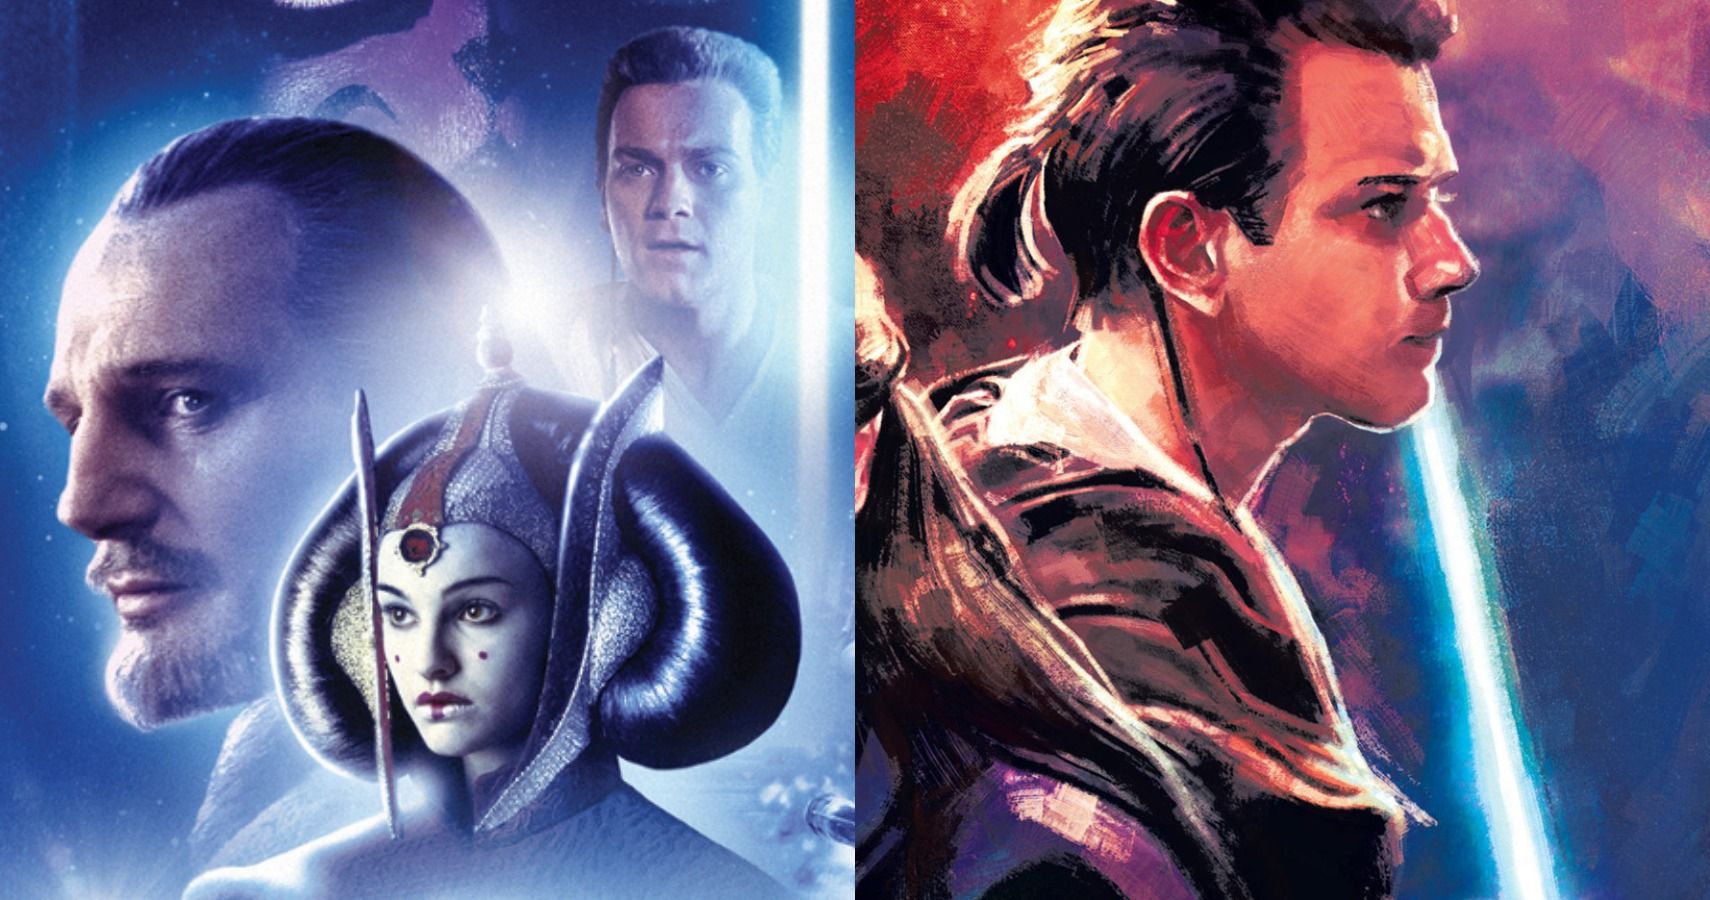 A split image of Phantom Menace fan art. One image shows Queen Amidala, Qui-Gonn, and Obi-Wan. The other is just Obi-Wan